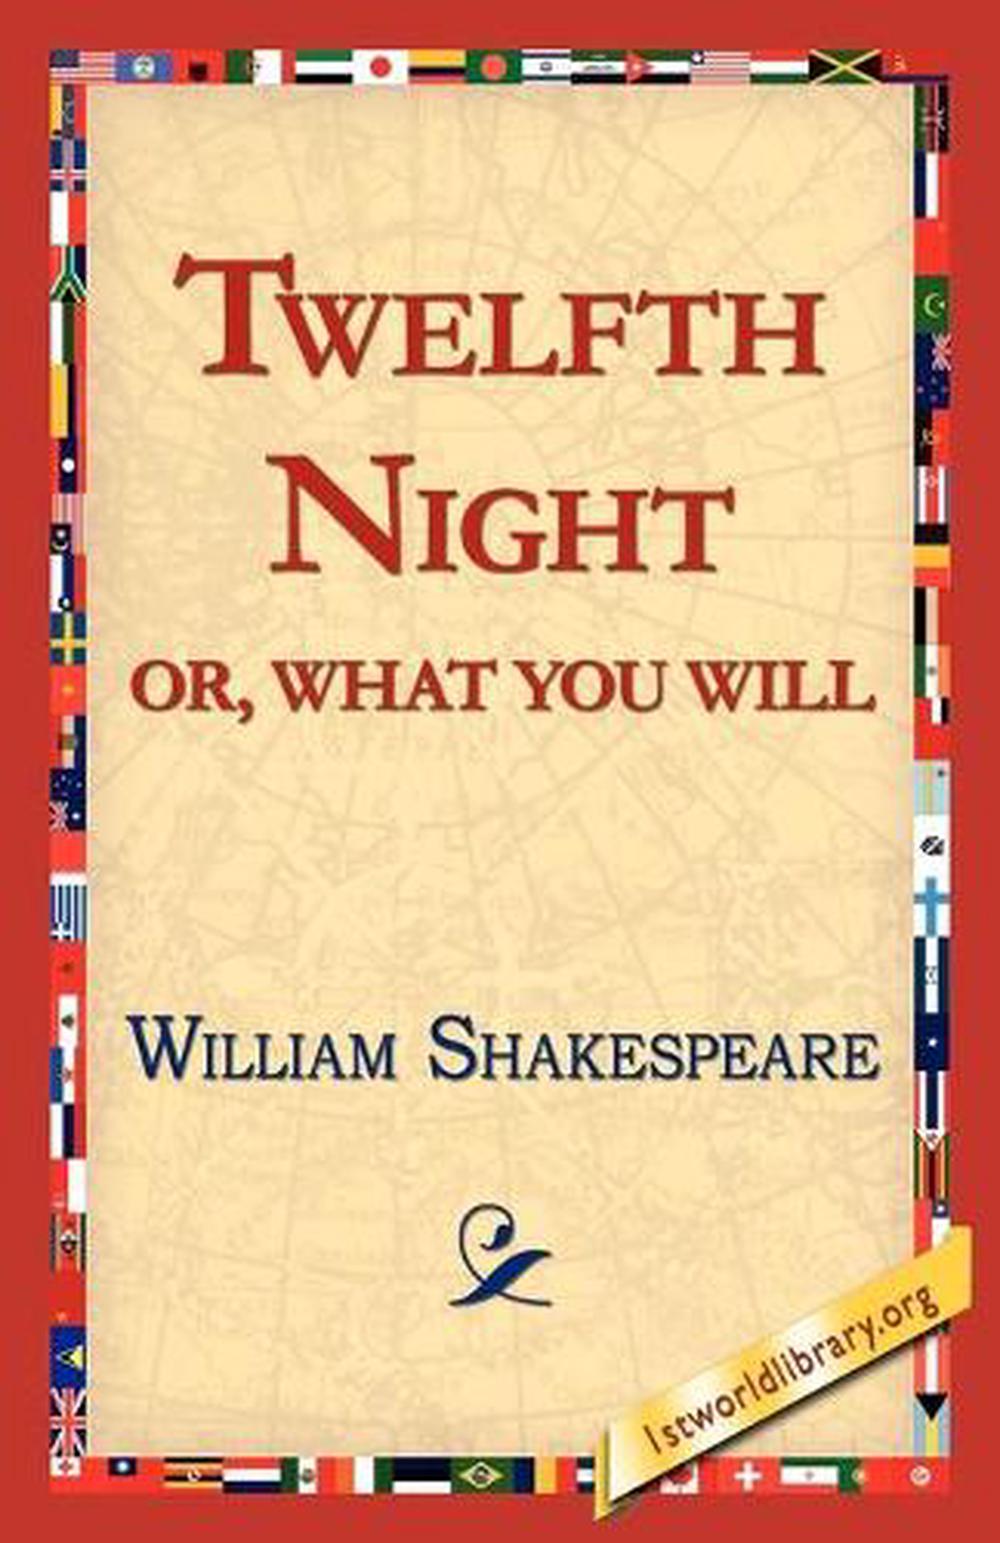 twelfth night or what you will by william shakespeare